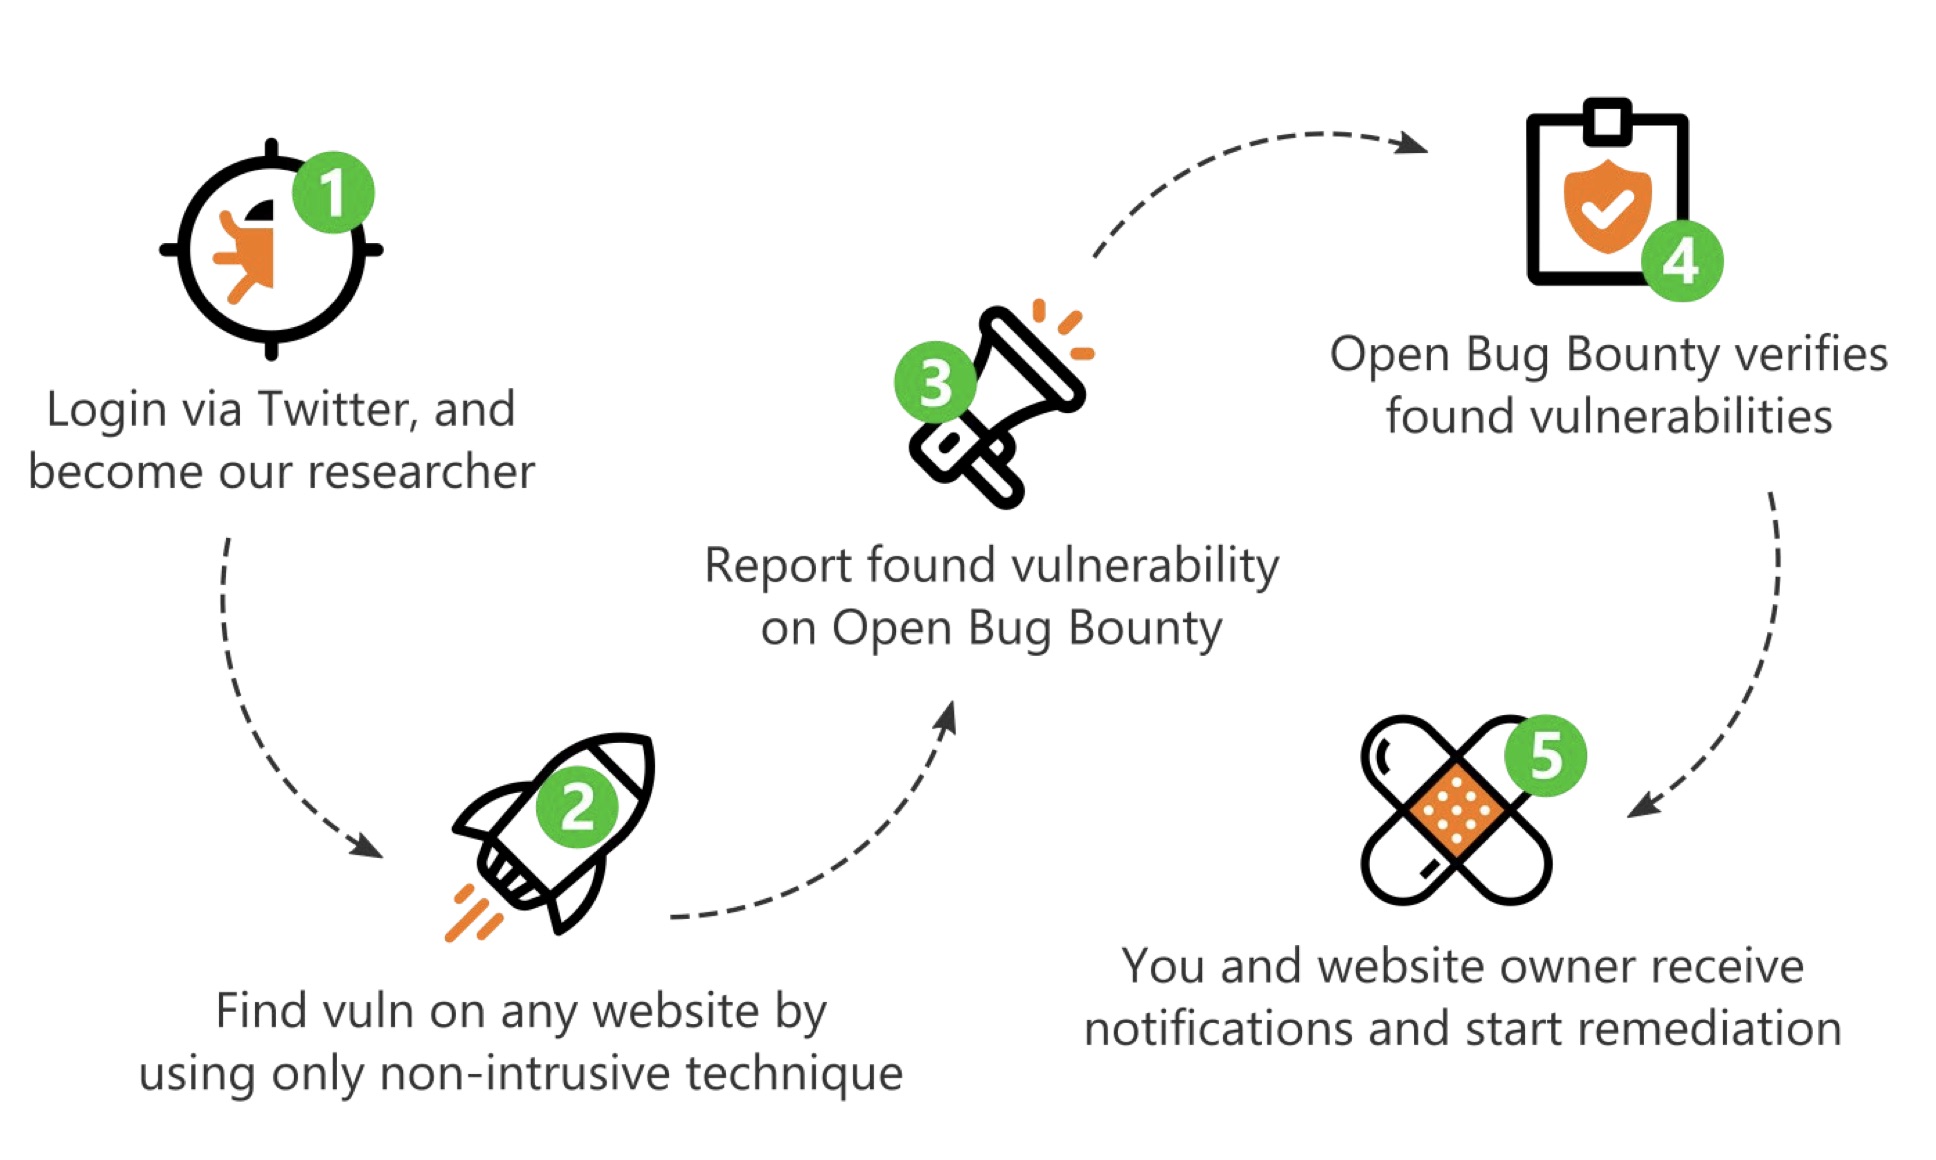 image showing how to get involved in open bug bounty